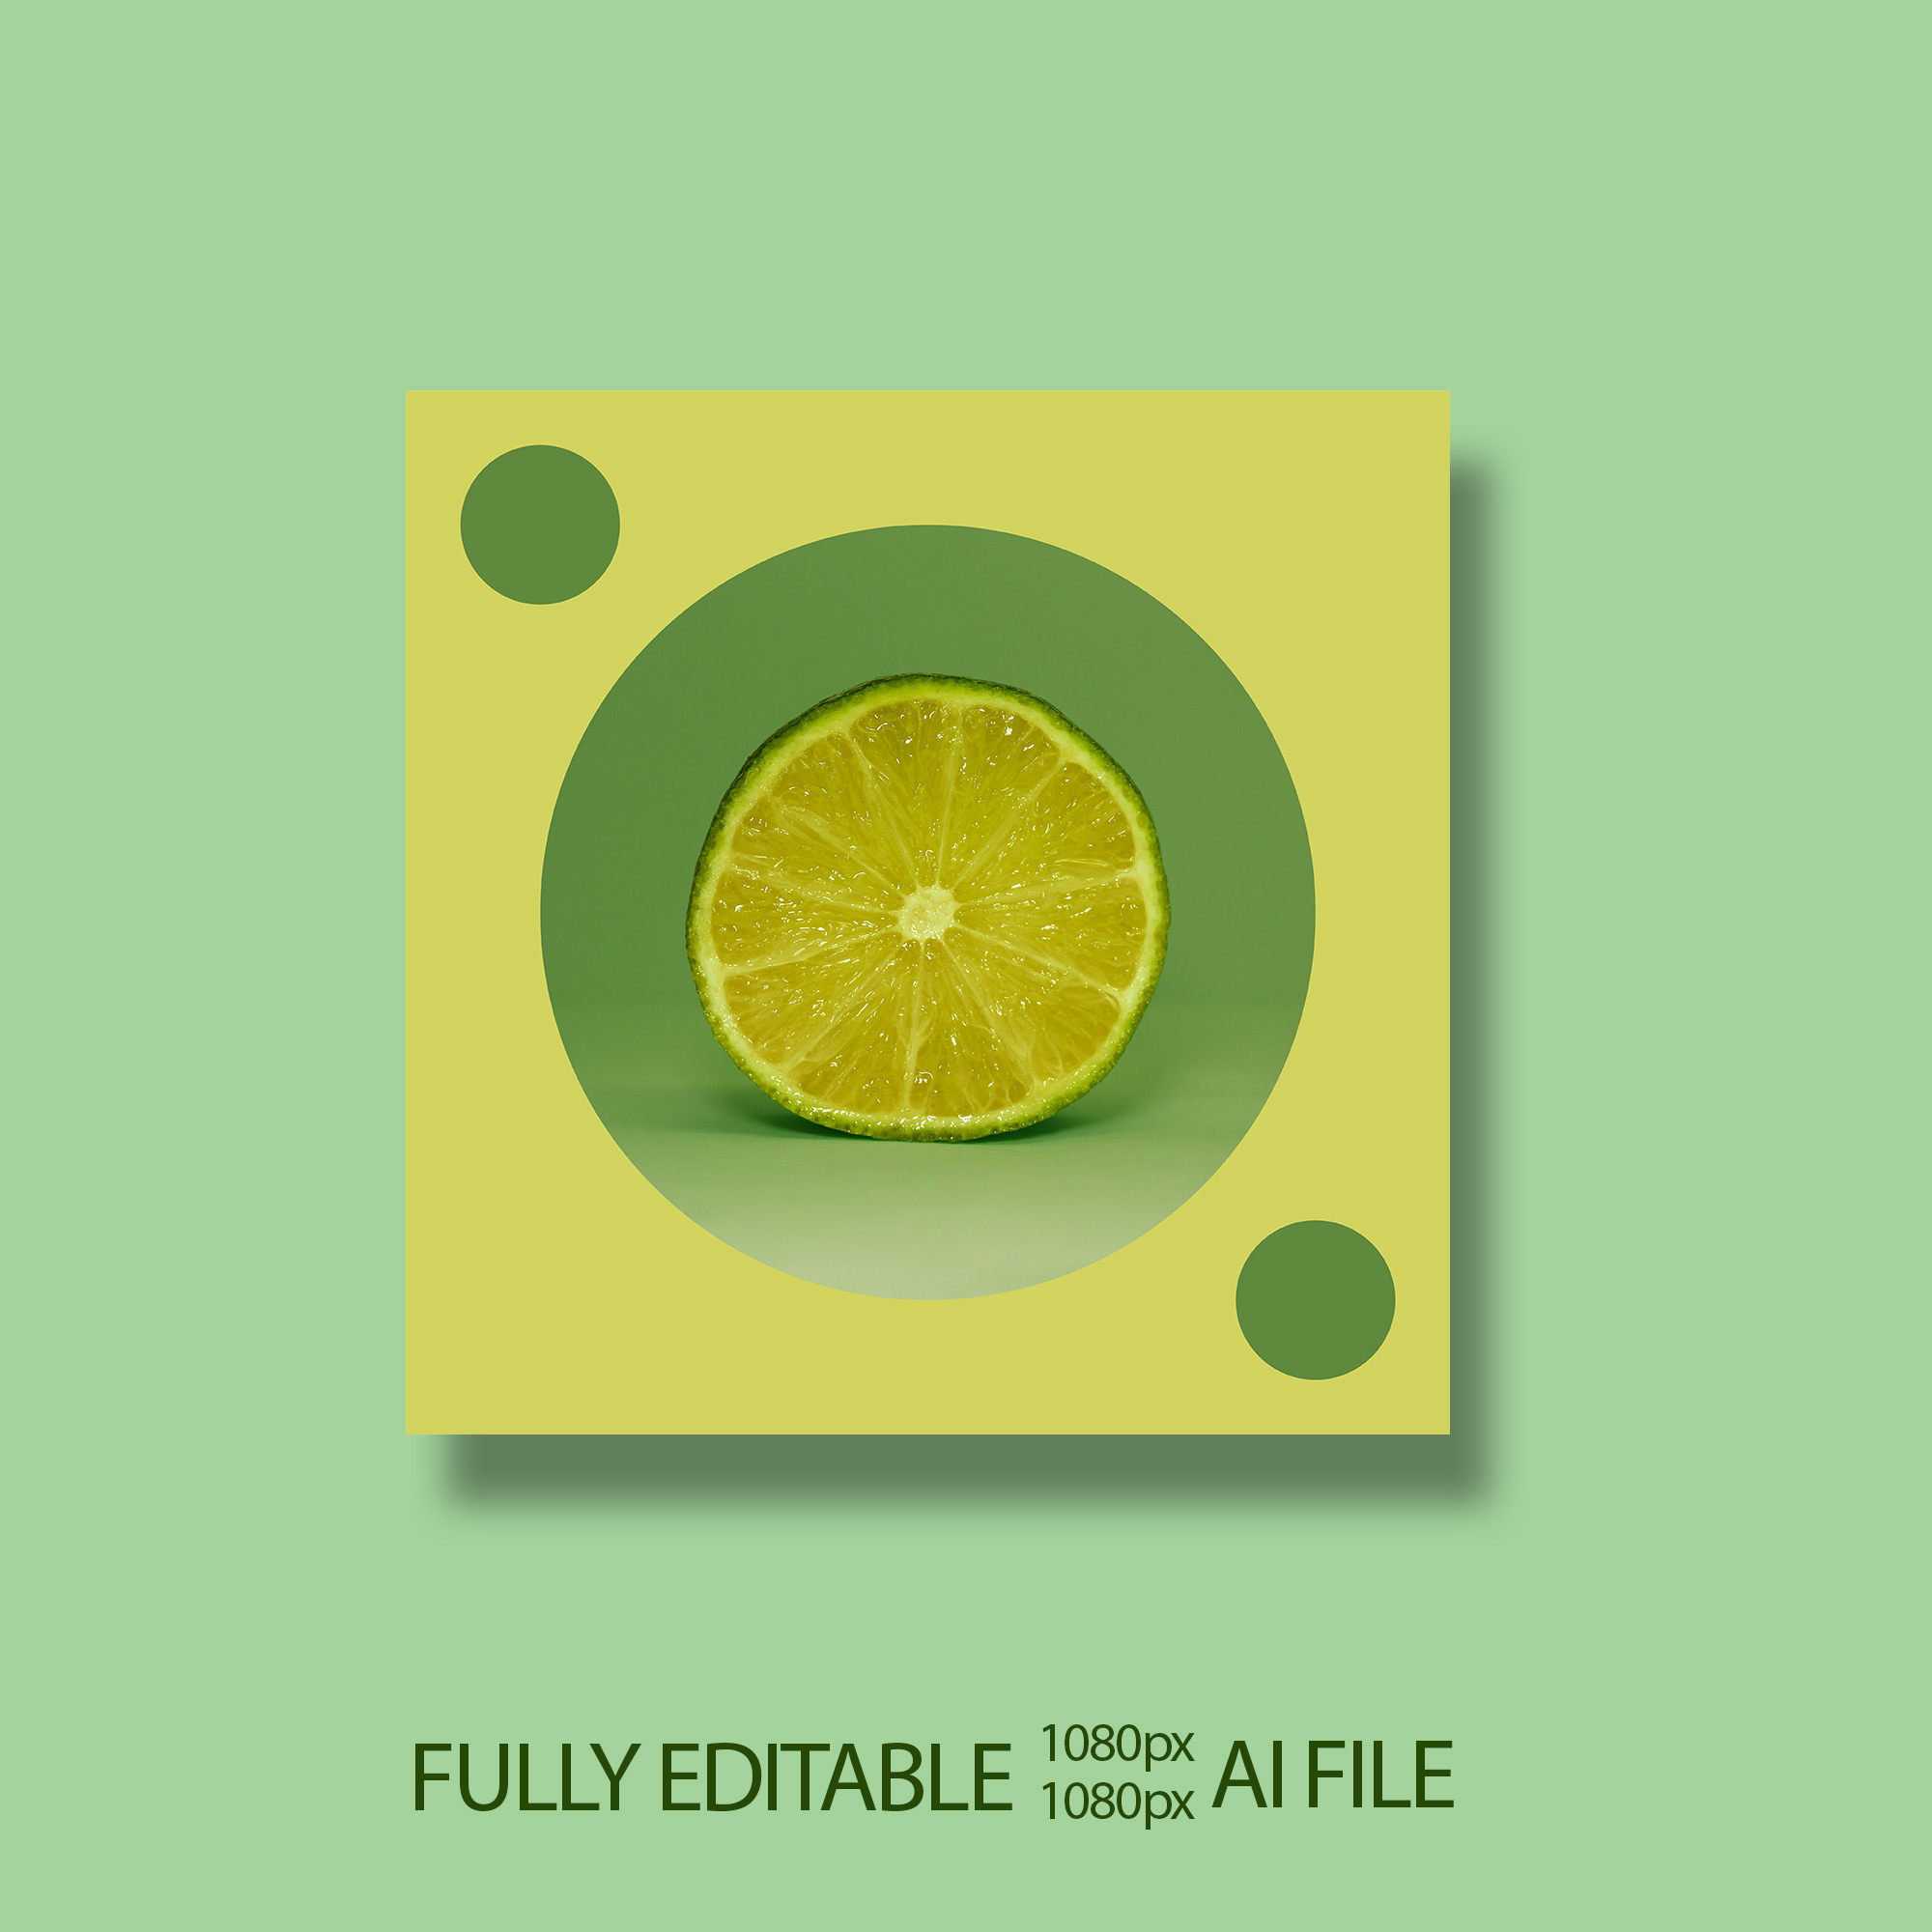 Lemon cut in half on a green and yellow background.